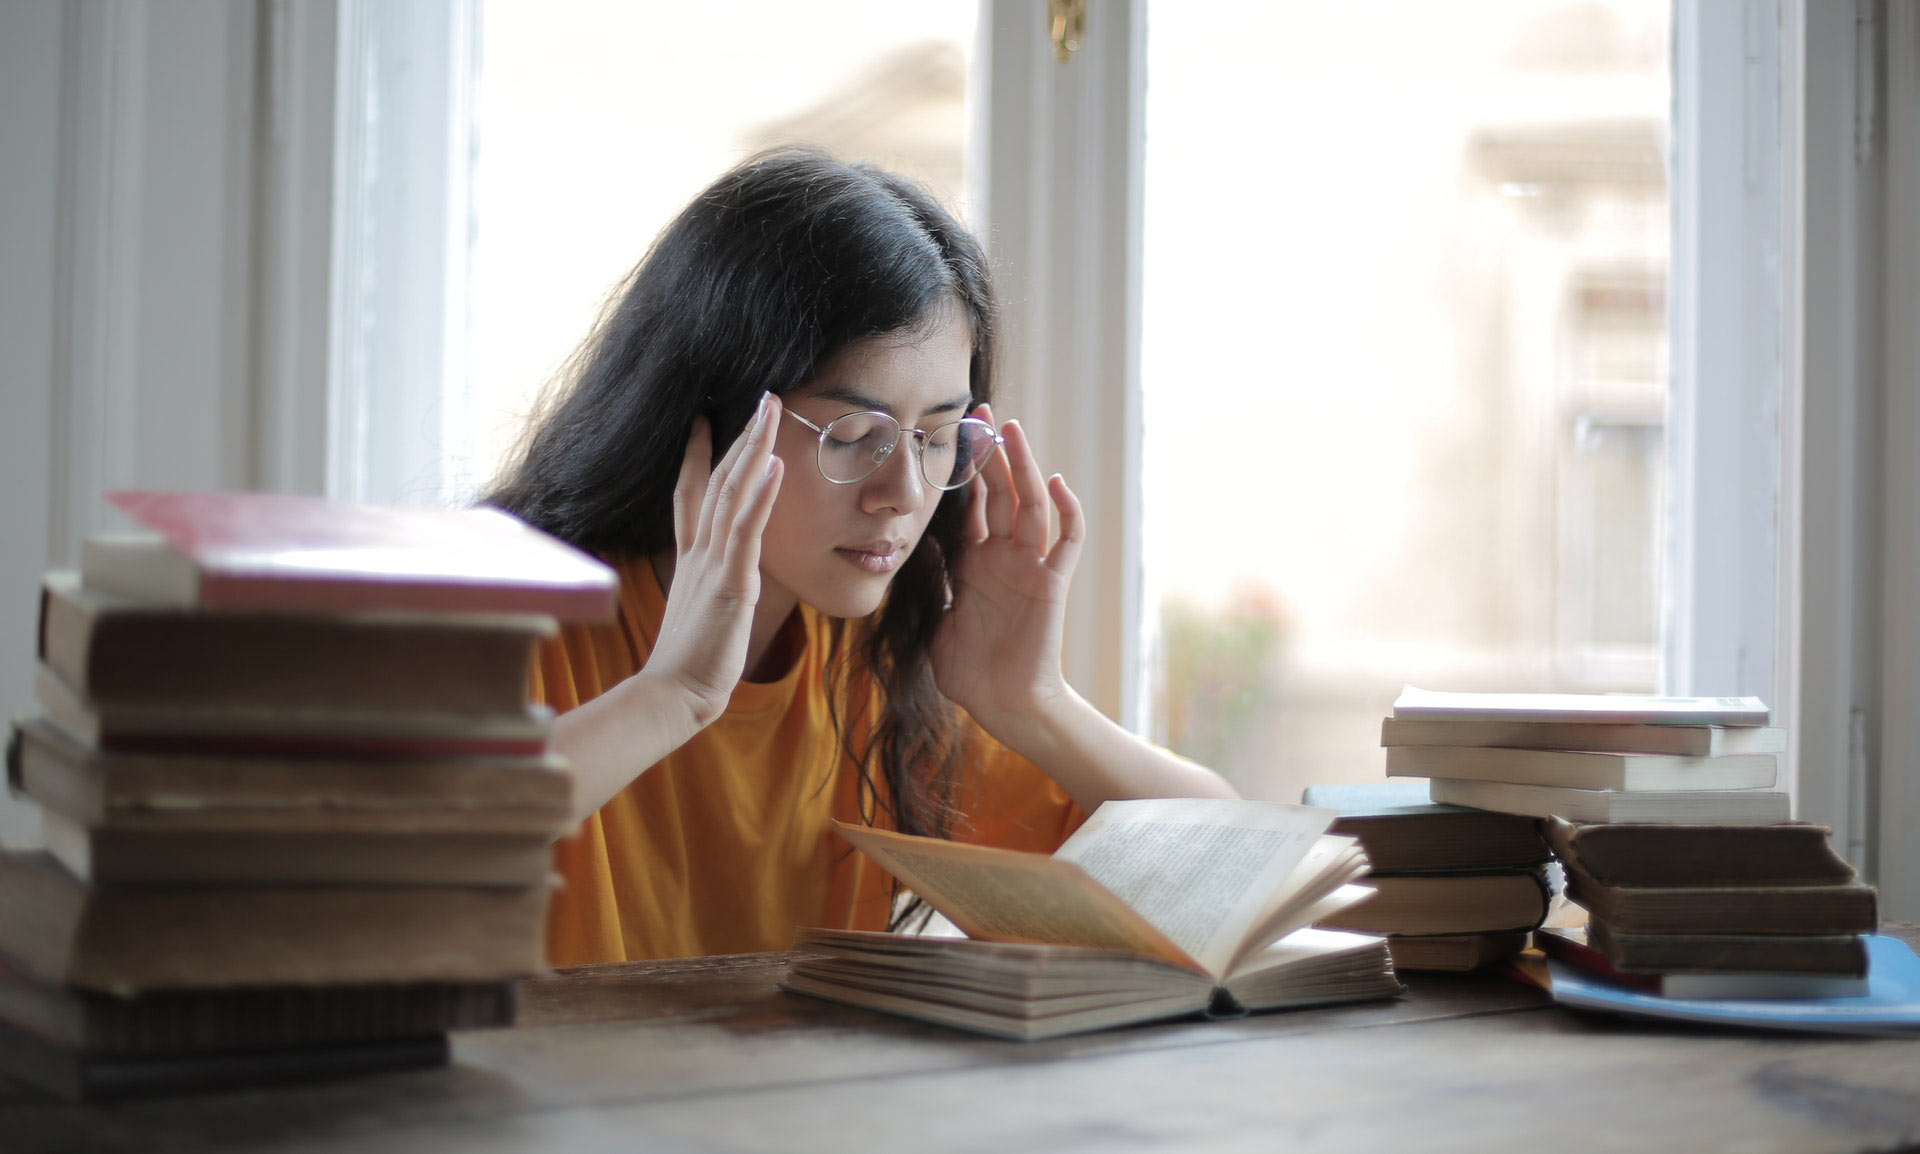 Does Dyslexia Come & Go? Tips for College Students with Literacy Difficulties